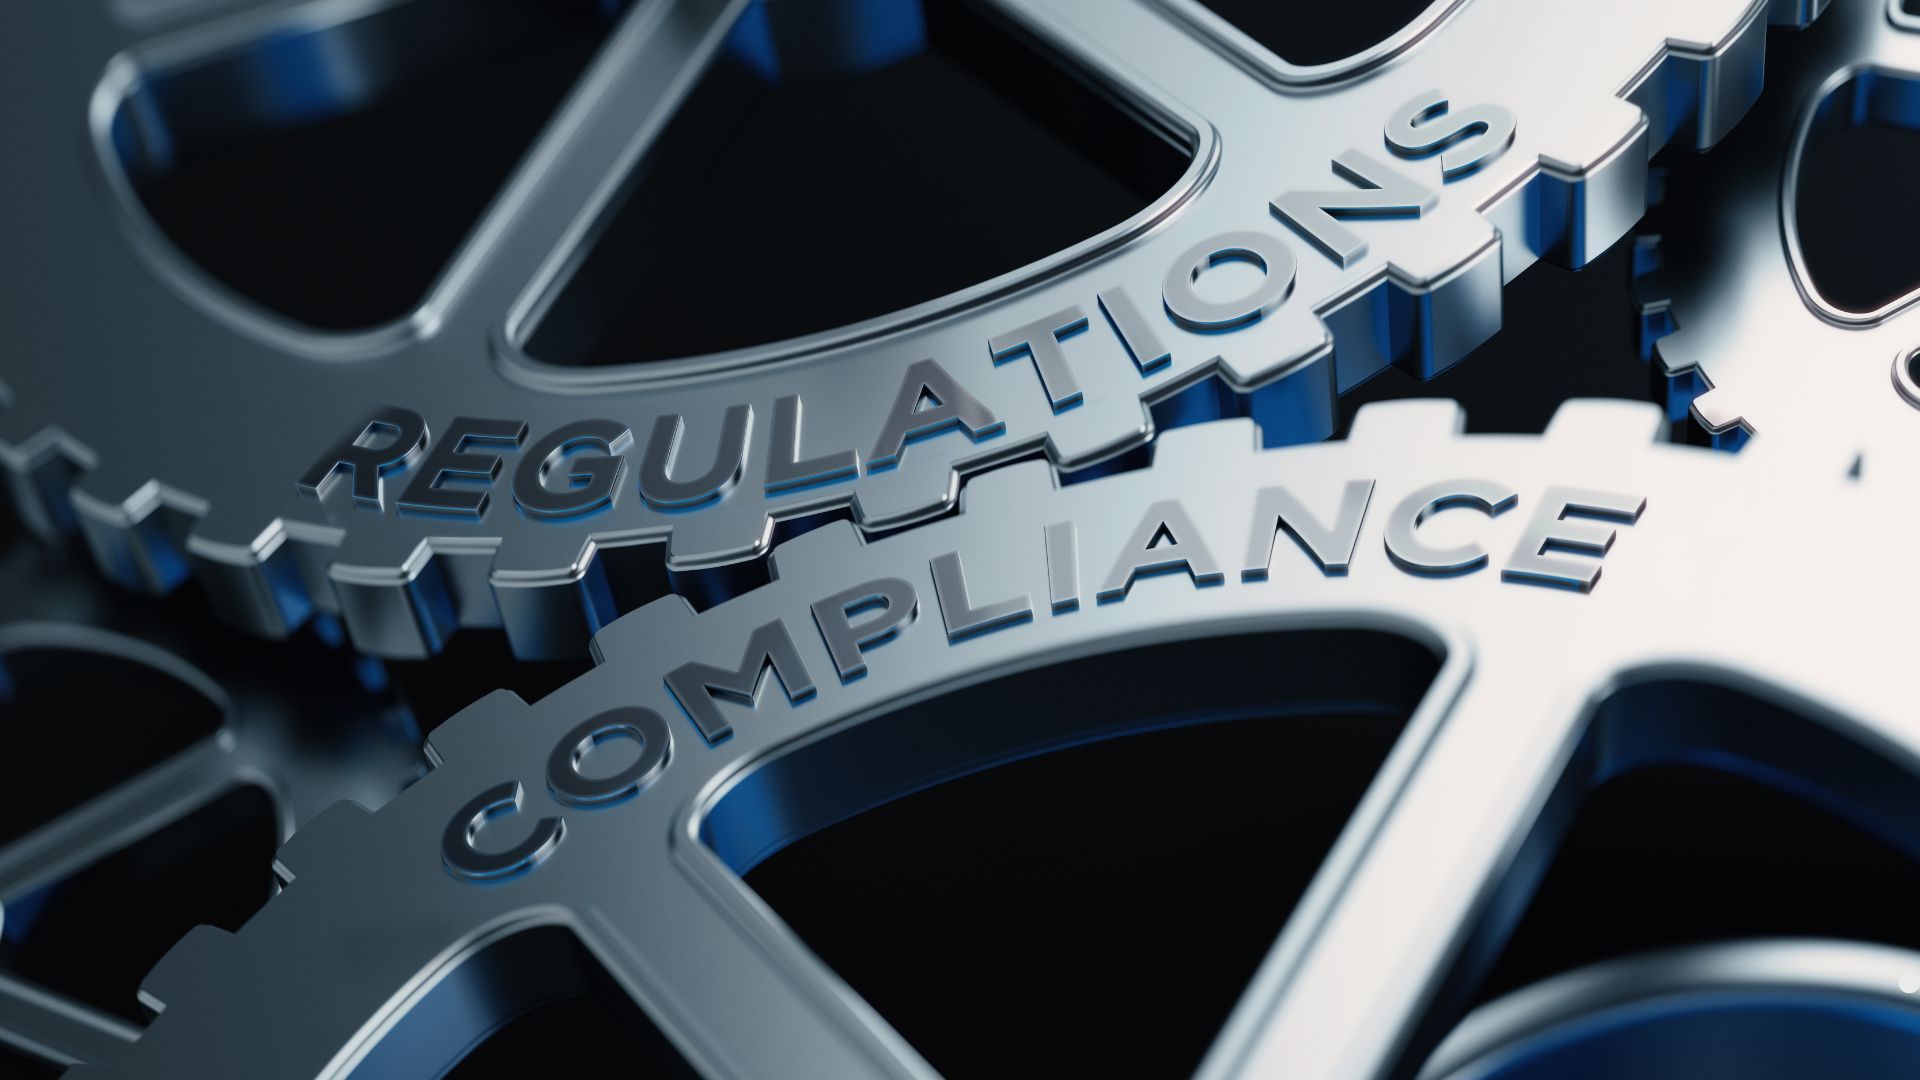 NIST 800-171 Compliance: How Much Does NIST Certification Cost?